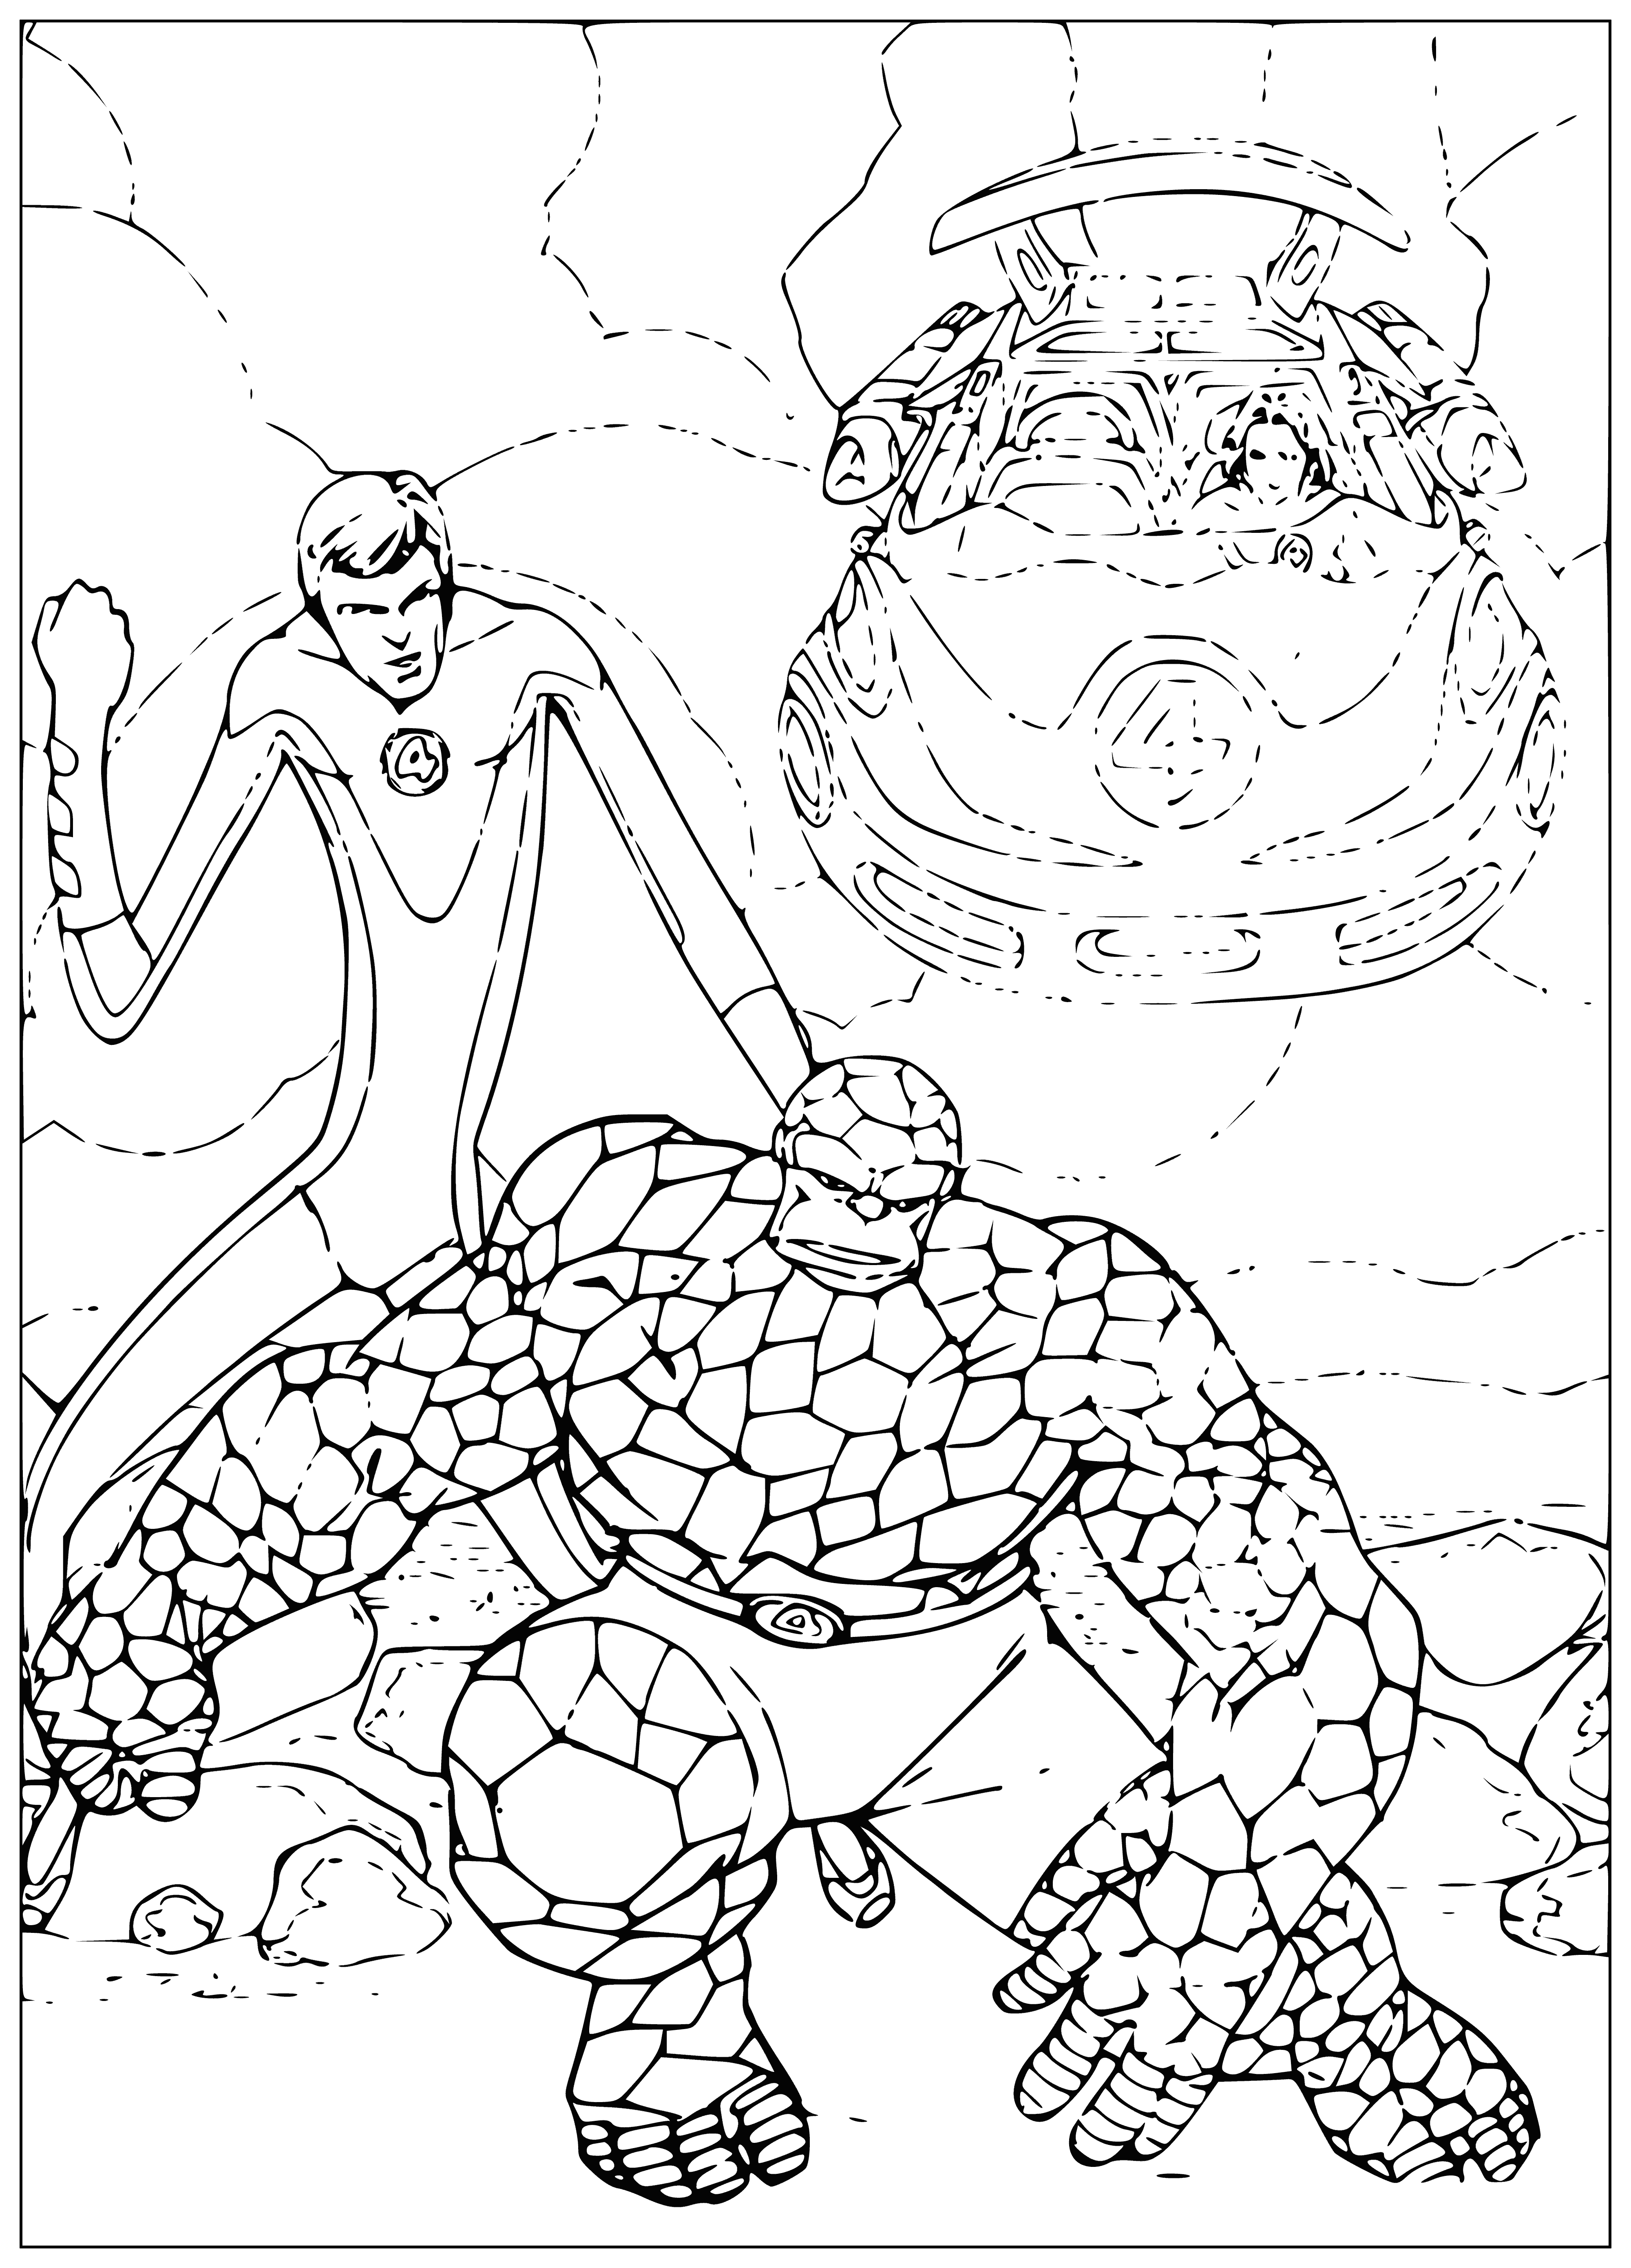 3 of 4 coloring page